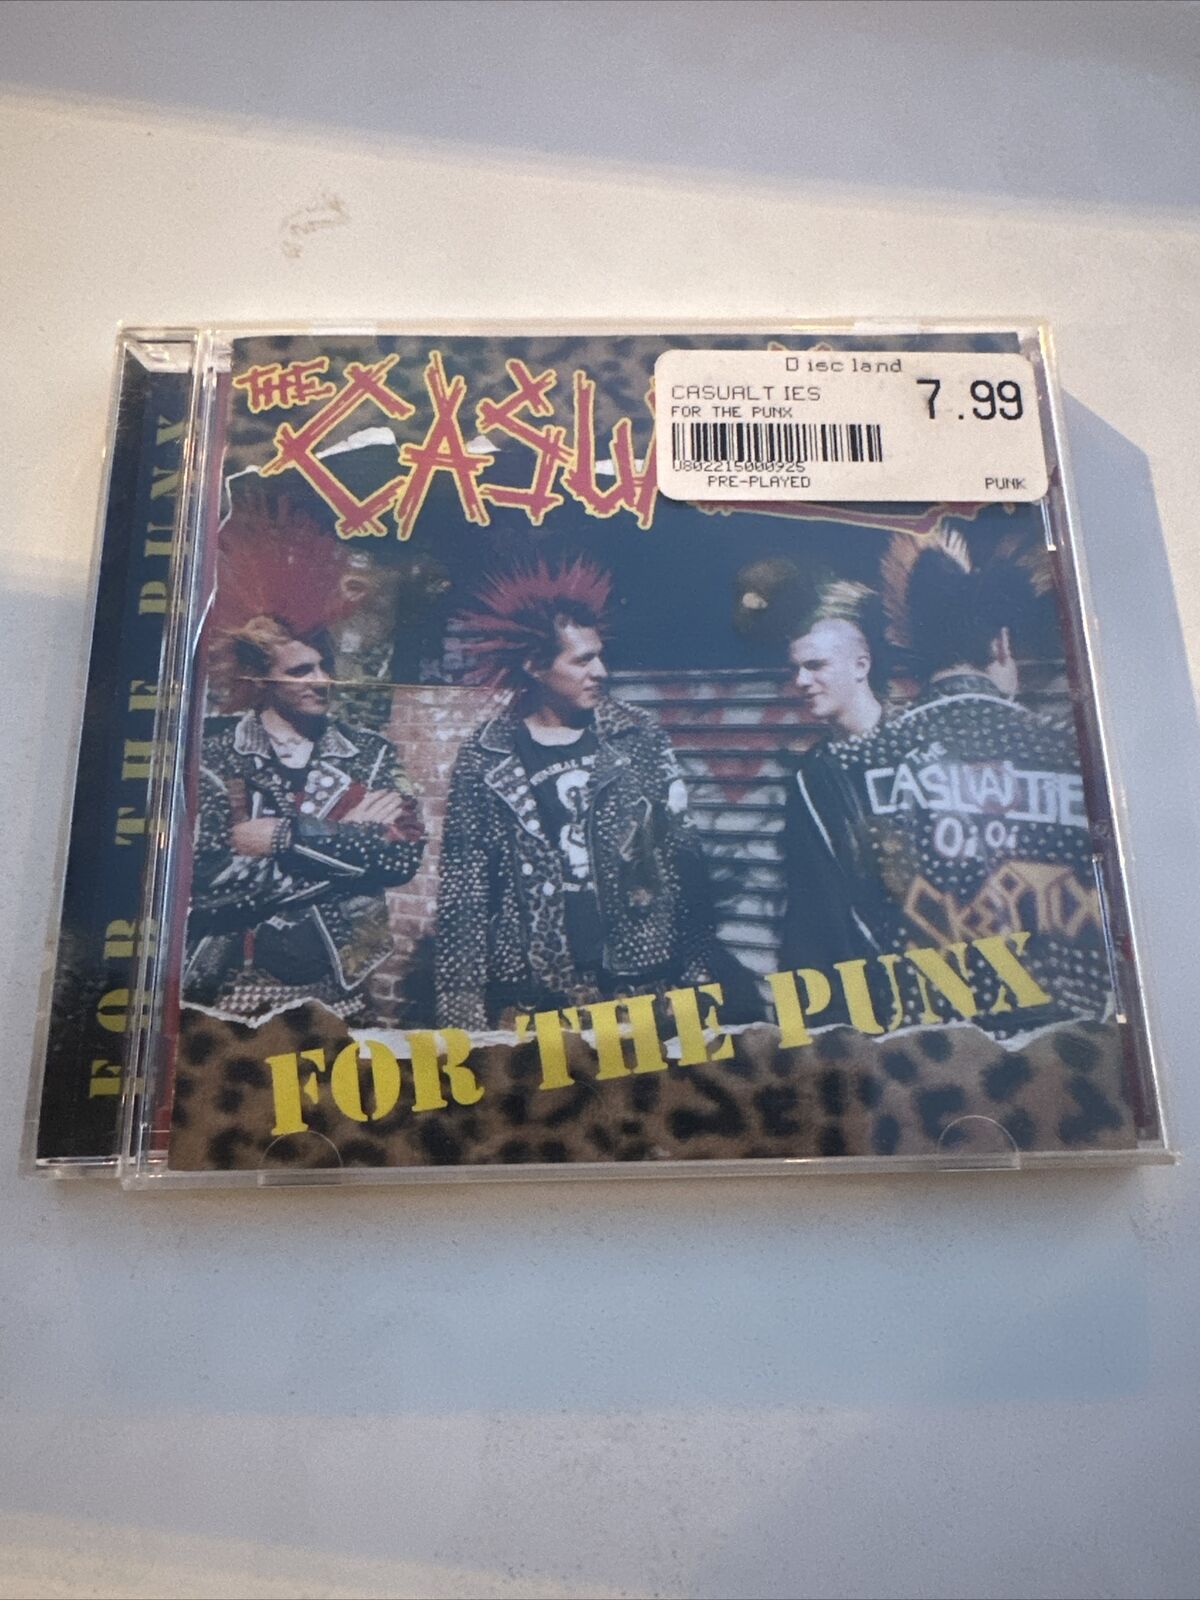 The  CASUALTIES: For the Punx CD